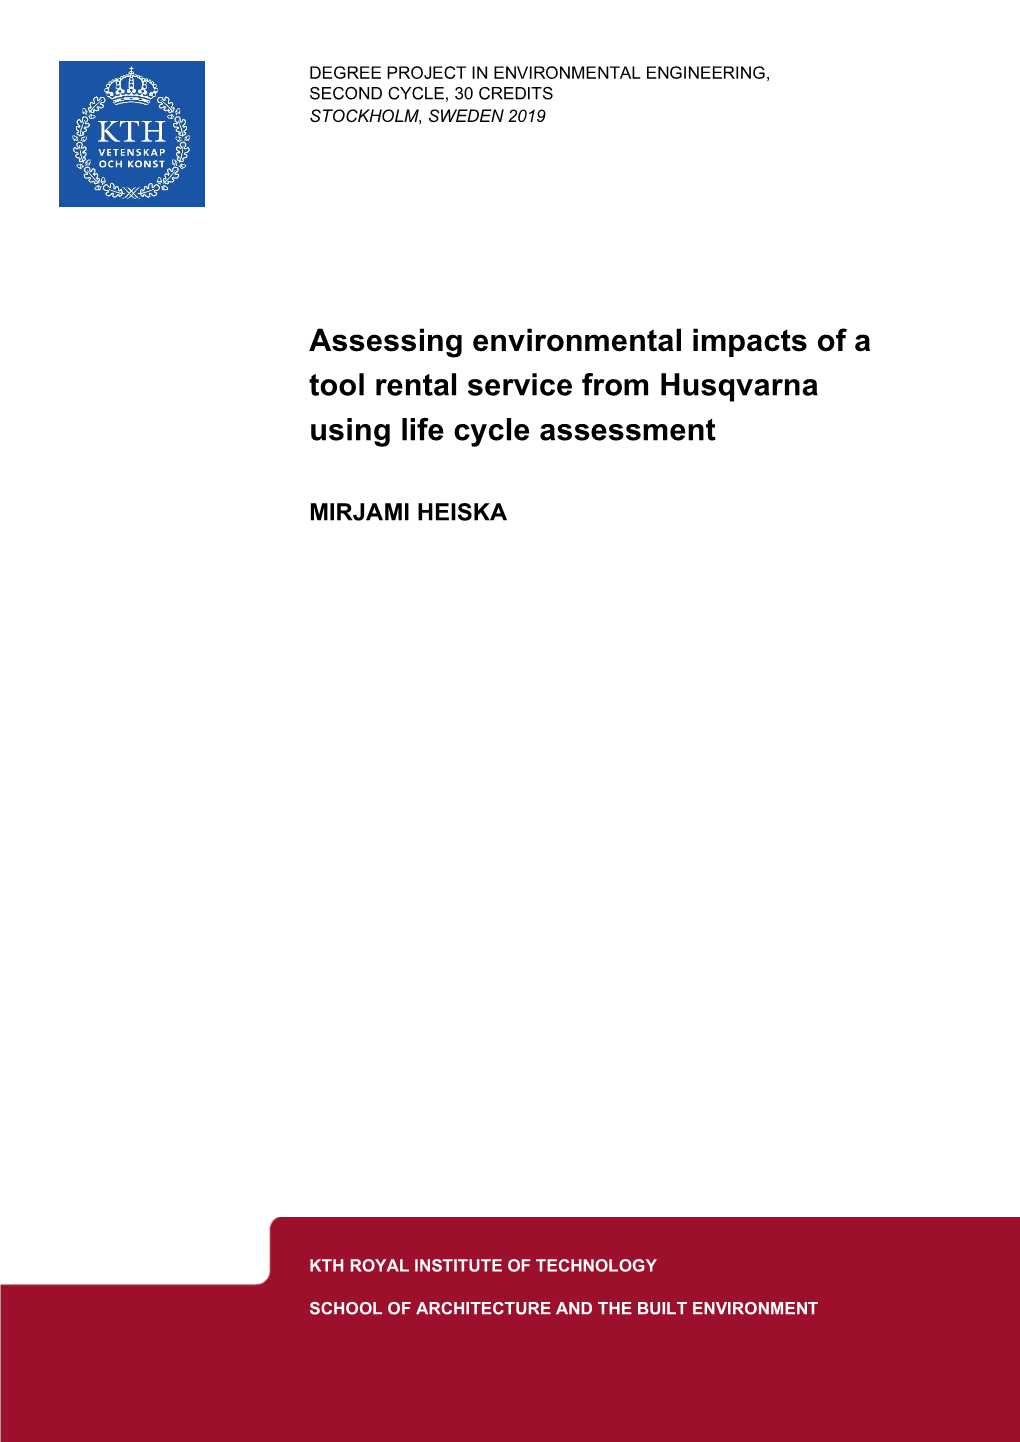 Assessing Environmental Impacts of a Tool Rental Service from Husqvarna Using Life Cycle Assessment